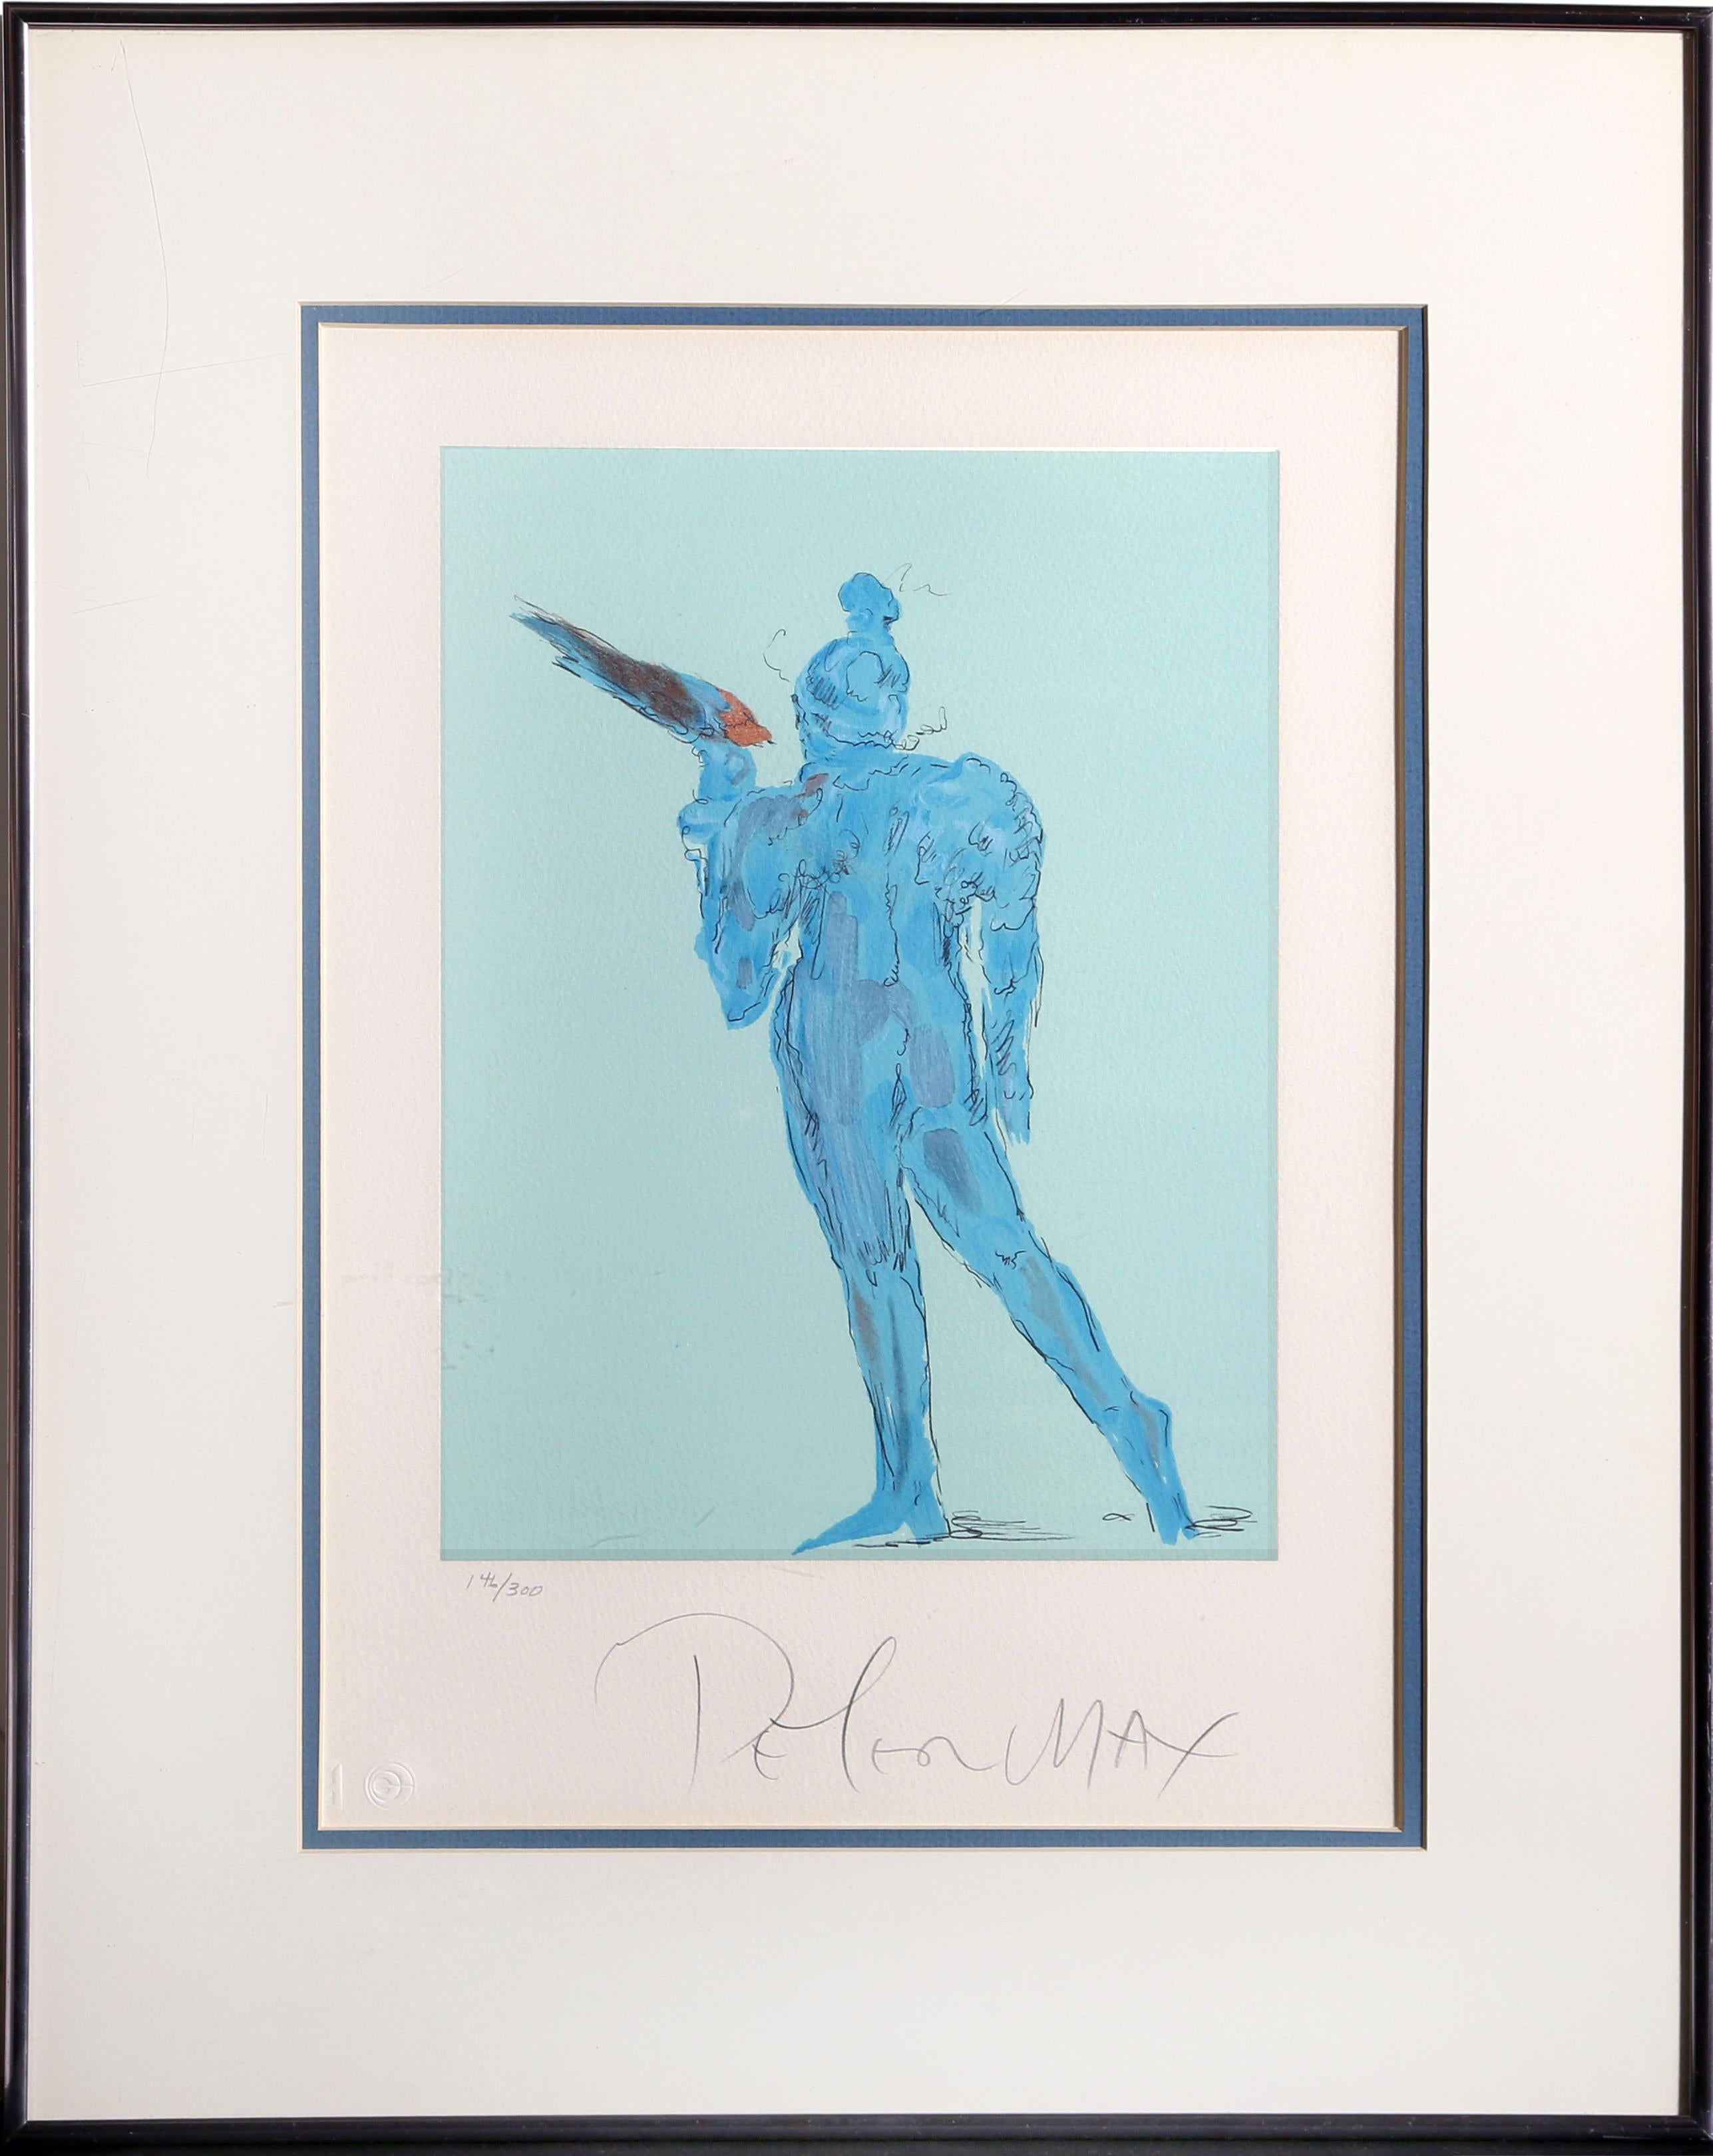 Artist: Peter Max, German/American (1937 - )
Title: Circus Performer with Bird
Year: 1976
Medium: Lithograph, signed and numbered in pencil
Edition: 300
Image Size: 12 x 9 inches
Frame Size: 23 x 18 inches